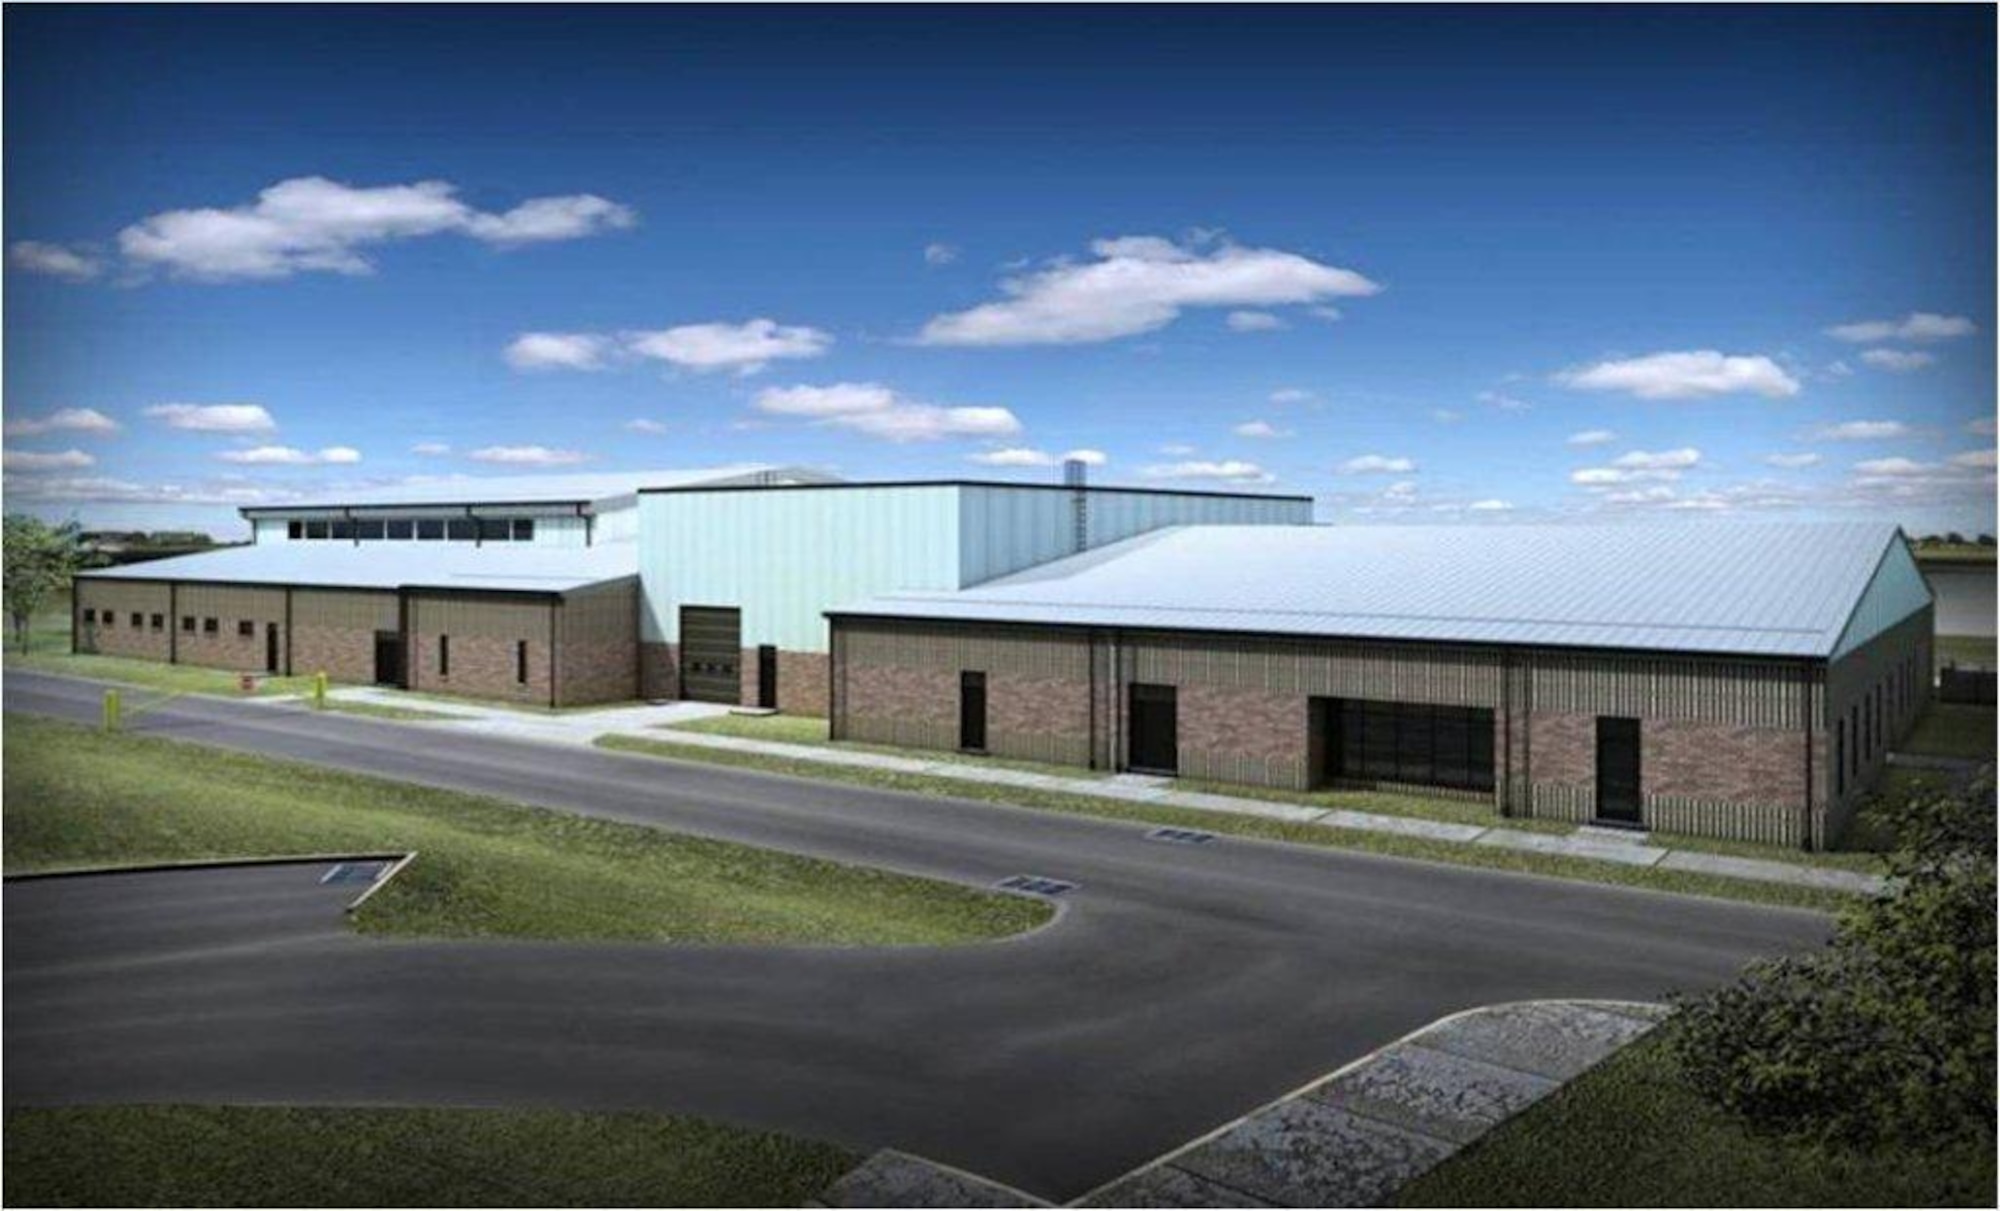 An artist’s rendering from the contracted architect, Benham Companies LLC, shows the Centralized Intermediate Repair Facility at the Bradley Air National Guard Base after upgrades and additional construction is completed.